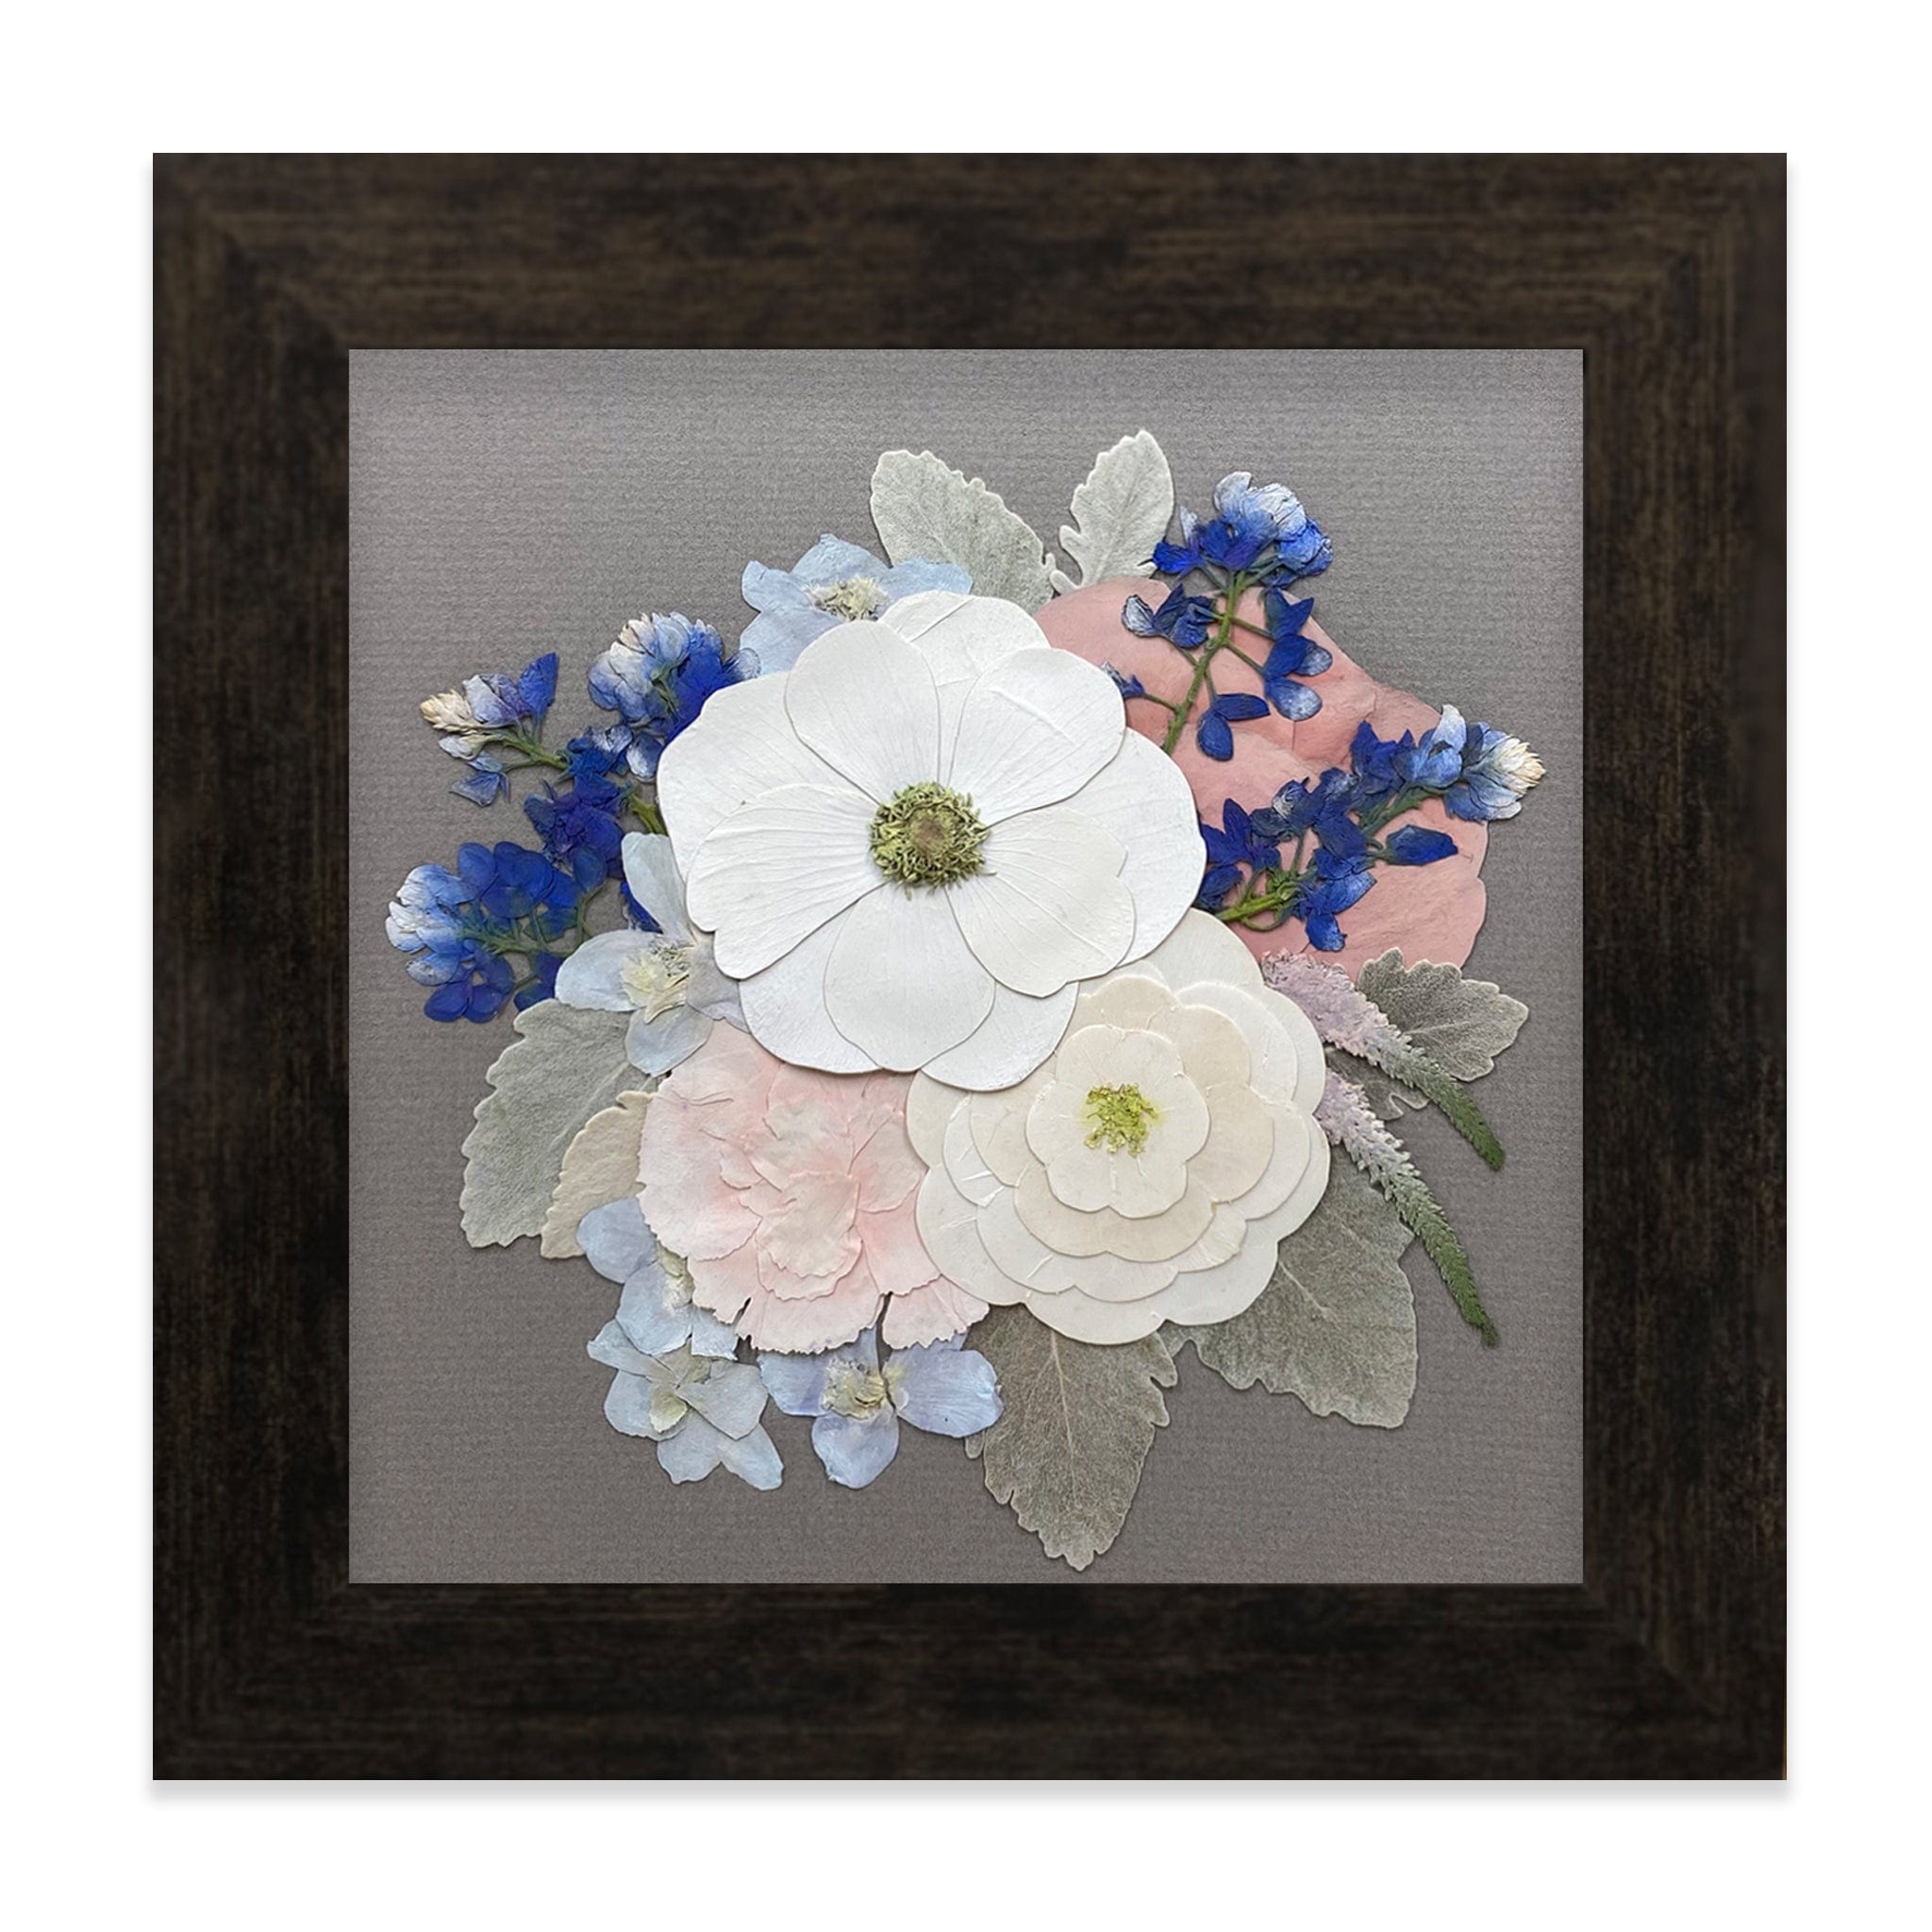 Pressed (Framed) 8" x 8" / Square / Small 8" x 8" Classic Frame - Designs By Andrea